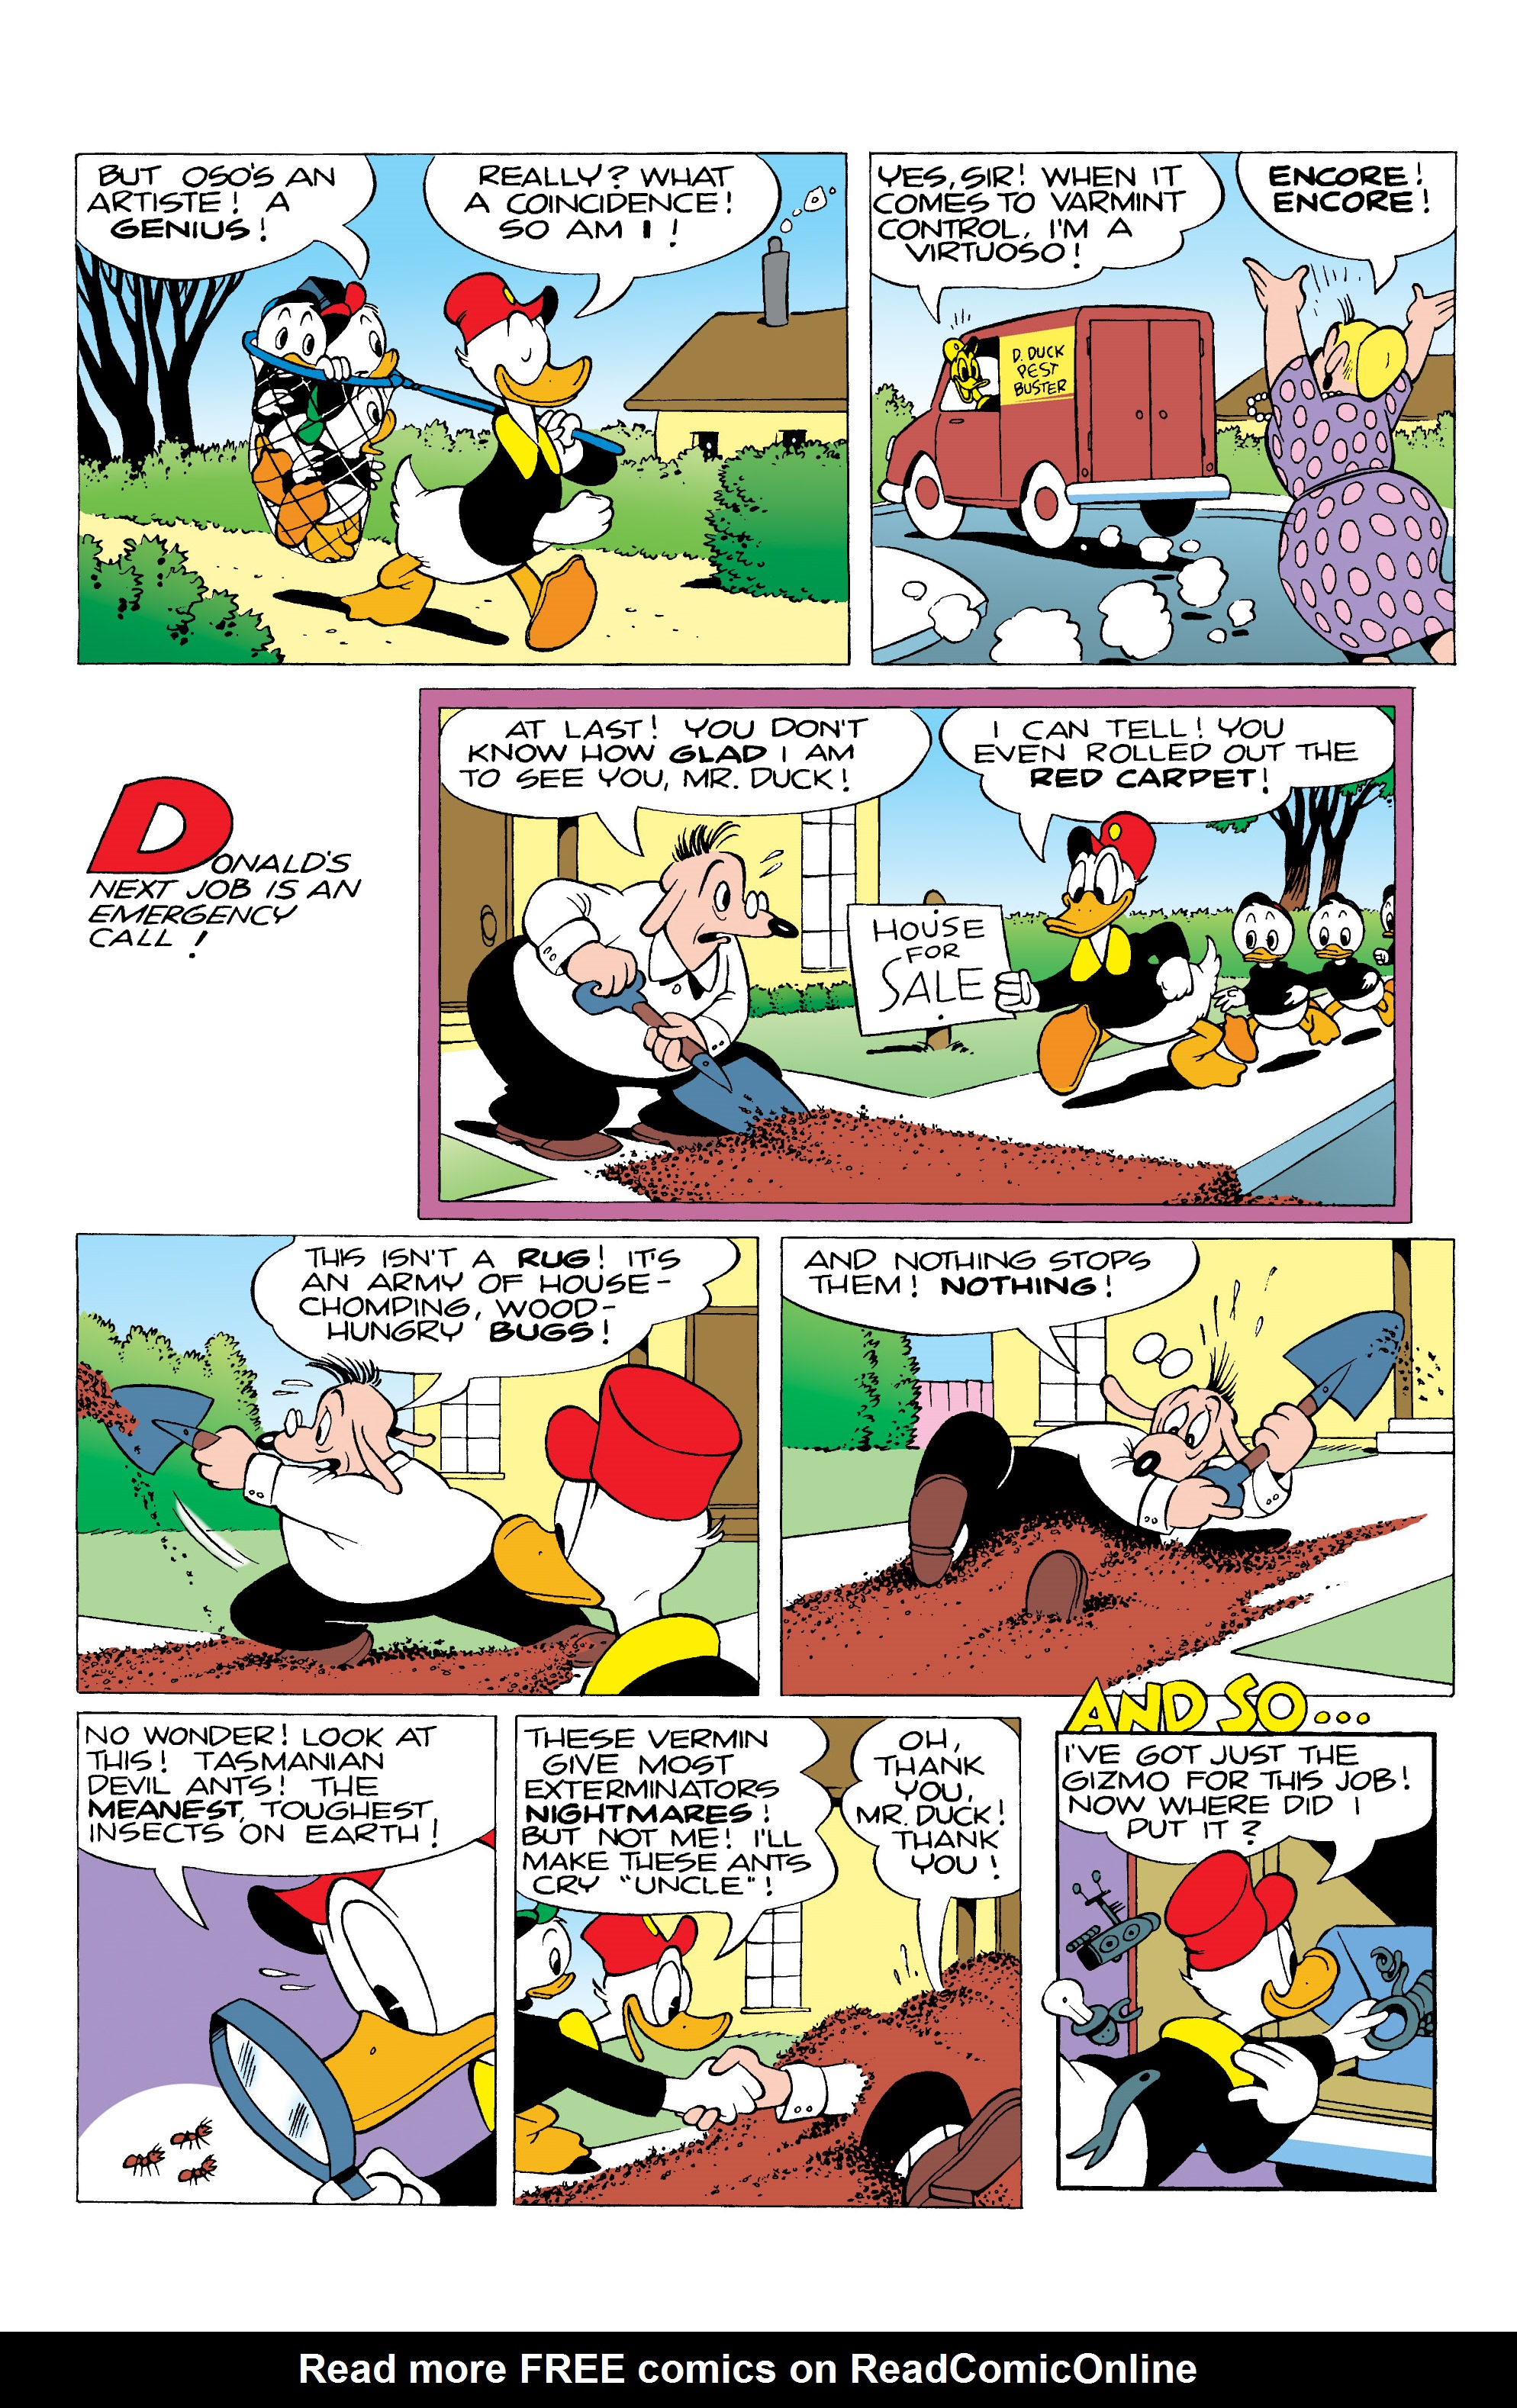 Read online Free Comic Book Day 2020 comic -  Issue # Disney Masters - Donald Duck - 6